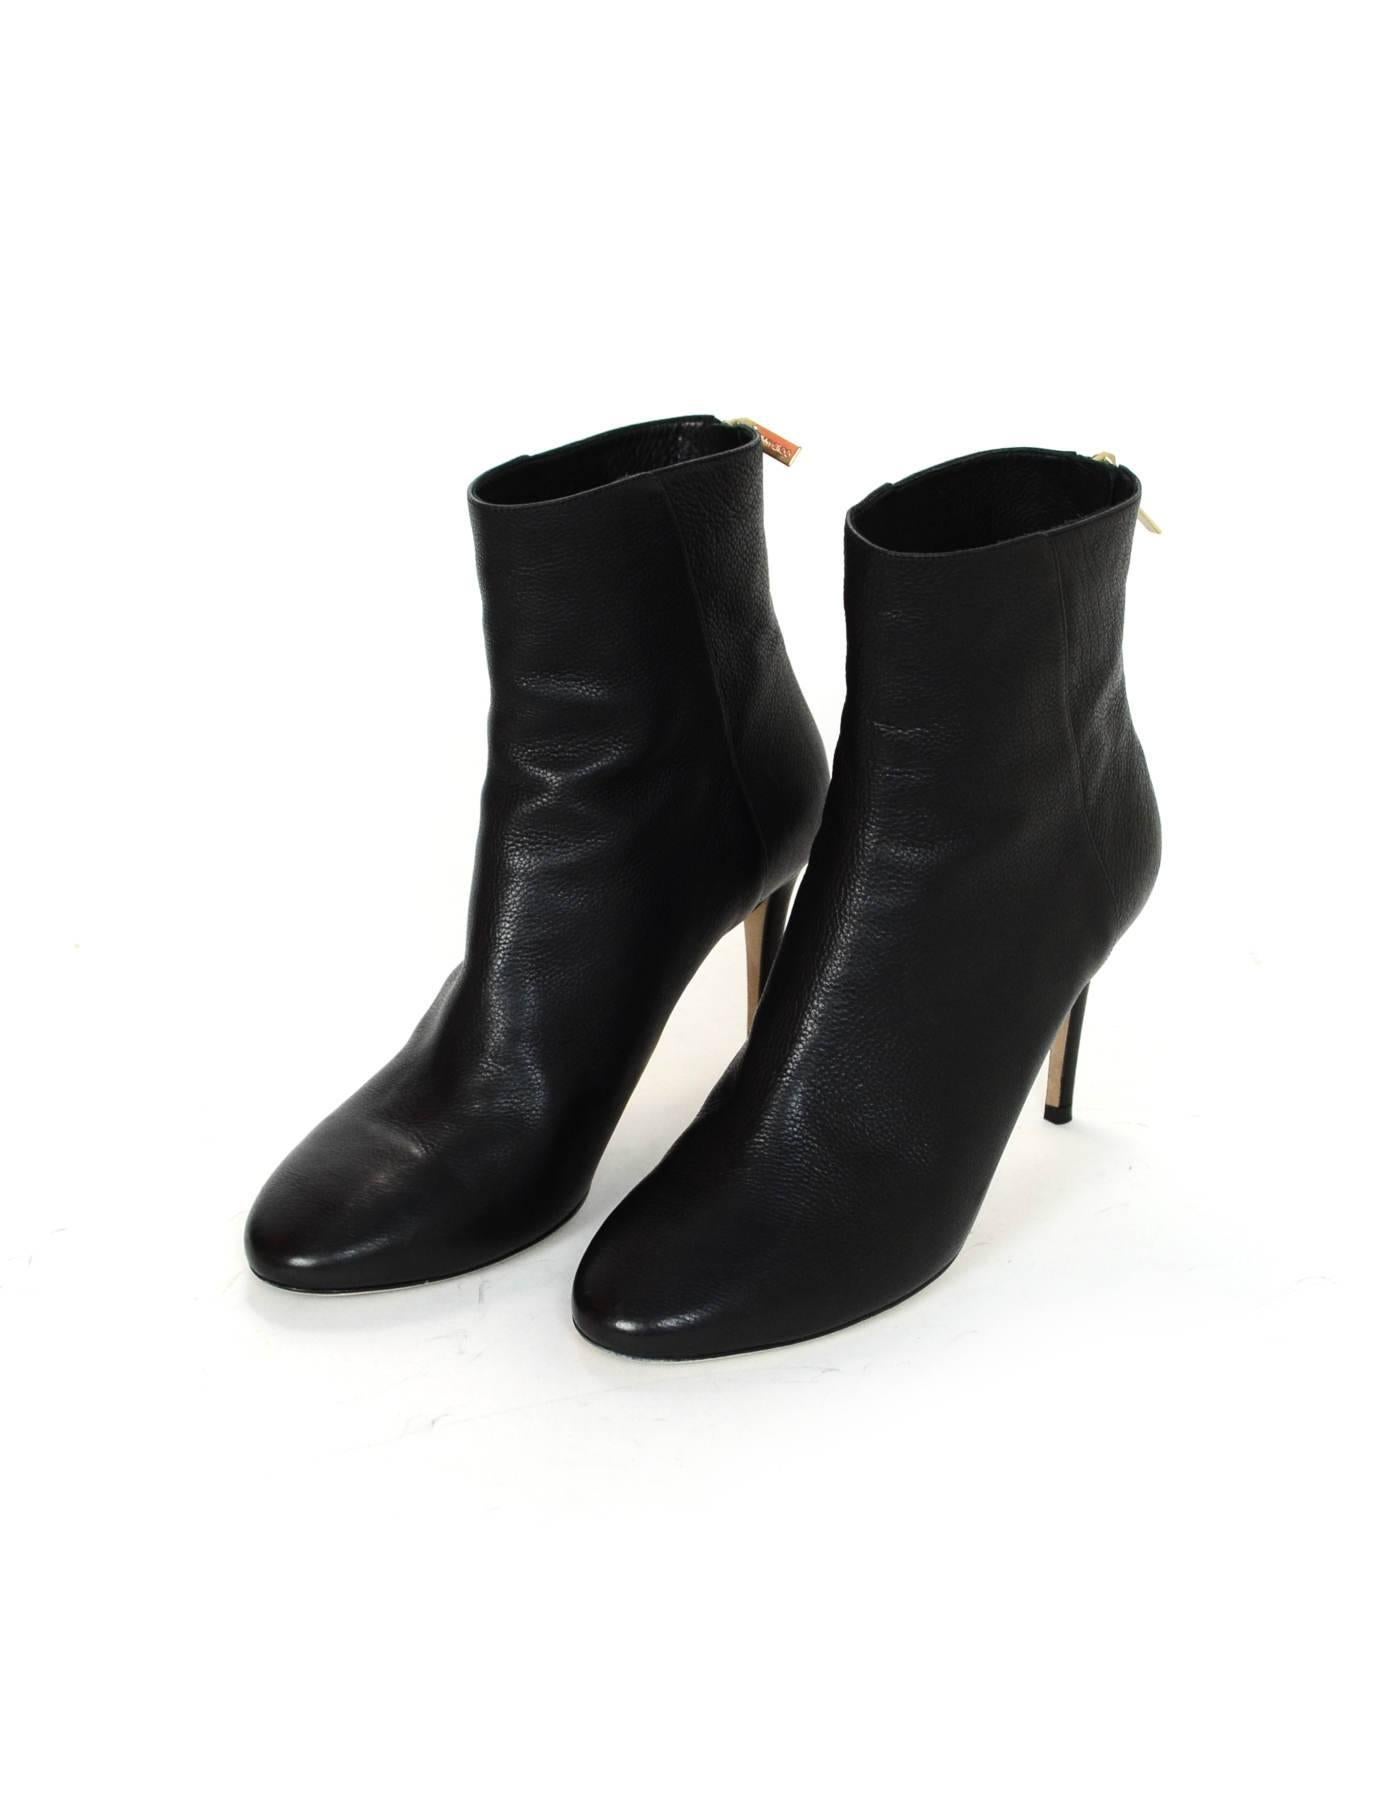 Jimmy Choo Black Leather Duke 85 Ankle Boots Sz 38

Made In: Italy
Color: Black
Materials: Leather
Closure/Opening: Zip closure at back of ankle
Sole Stamp: Jimmy Choo London Made in Italy 38
Retail Price: $895 + tax
Overall Condition: Excellent